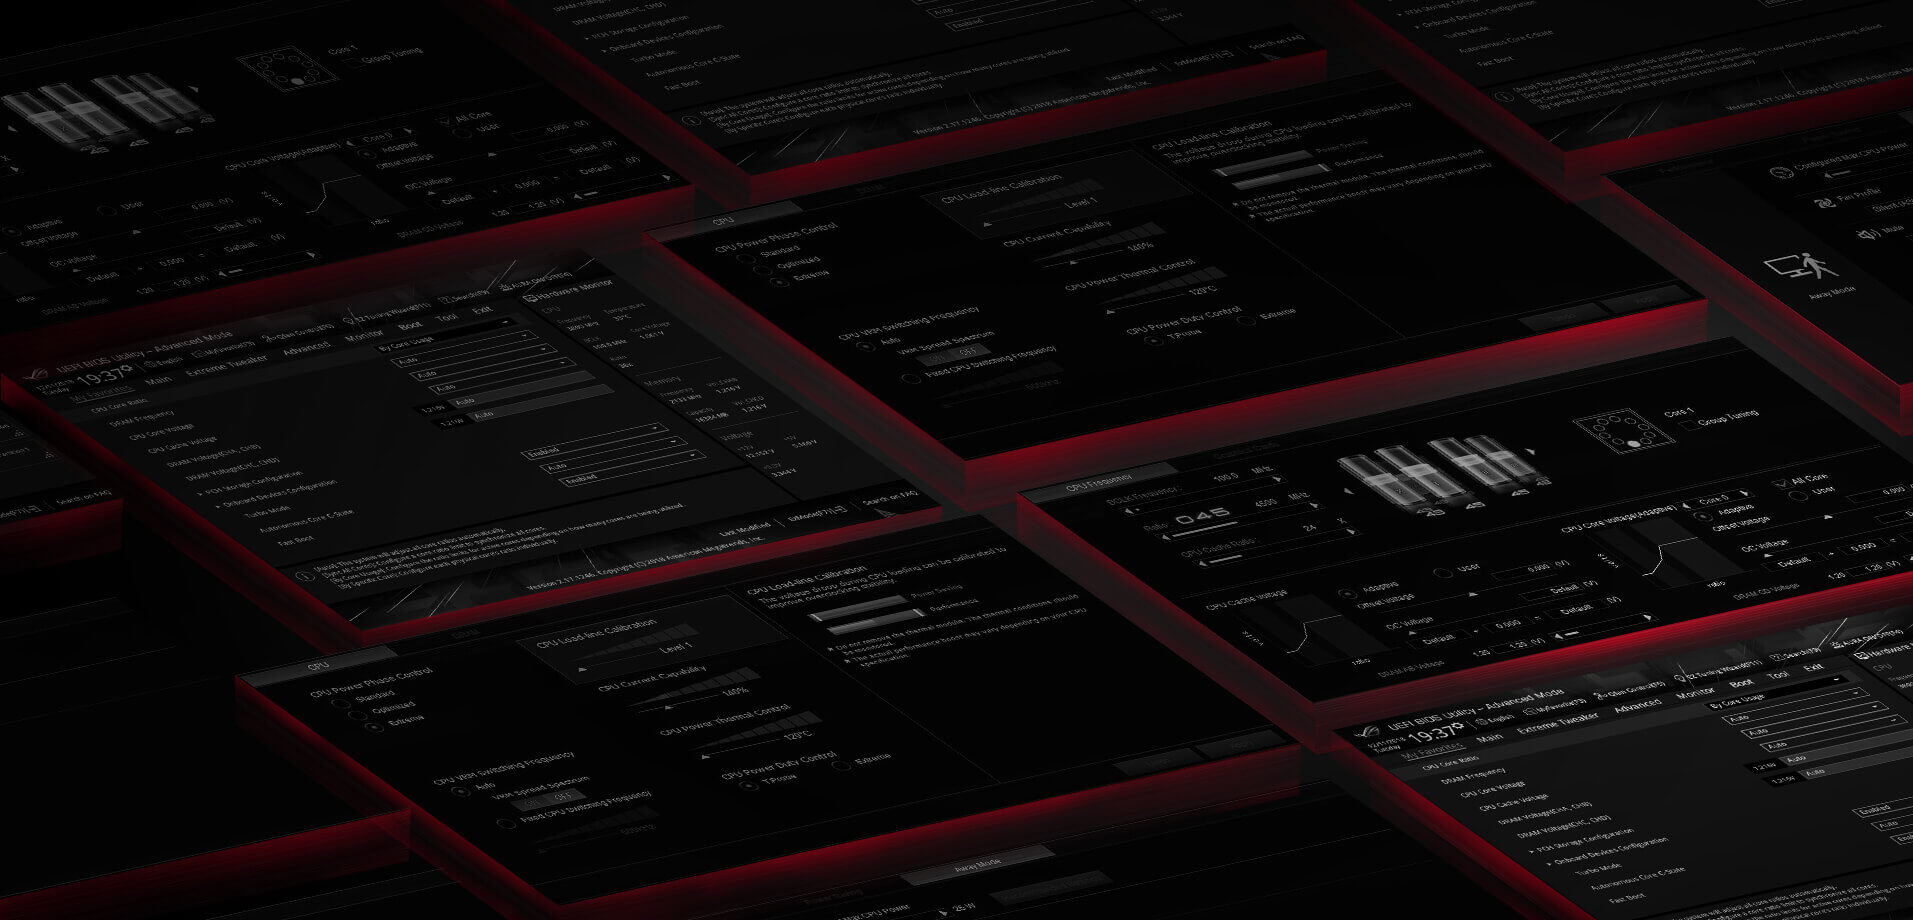 The software UI overview of ROG Crosshair VIII Extreme